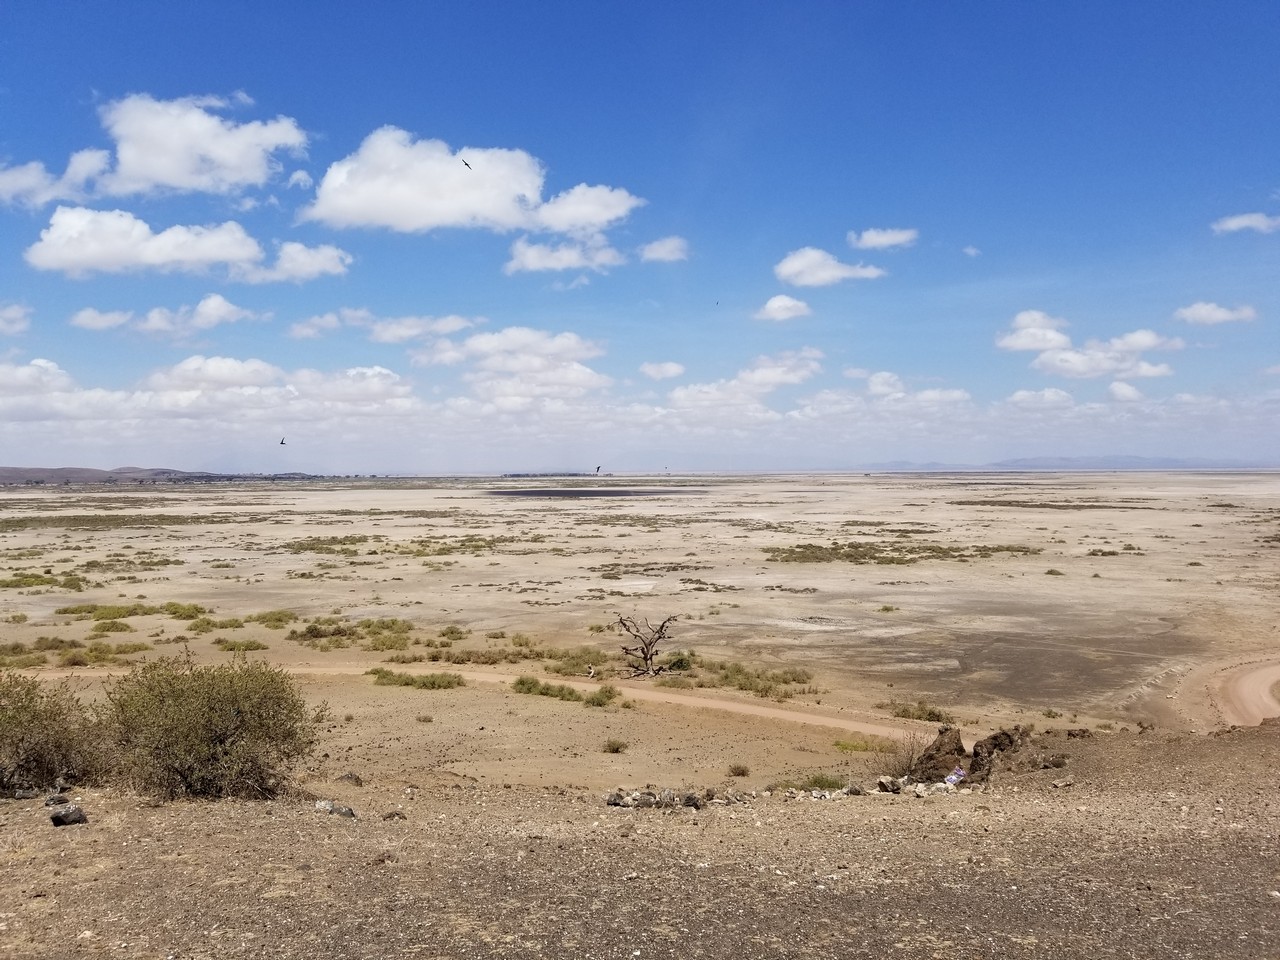 a landscape of a desert with a dirt road and blue sky